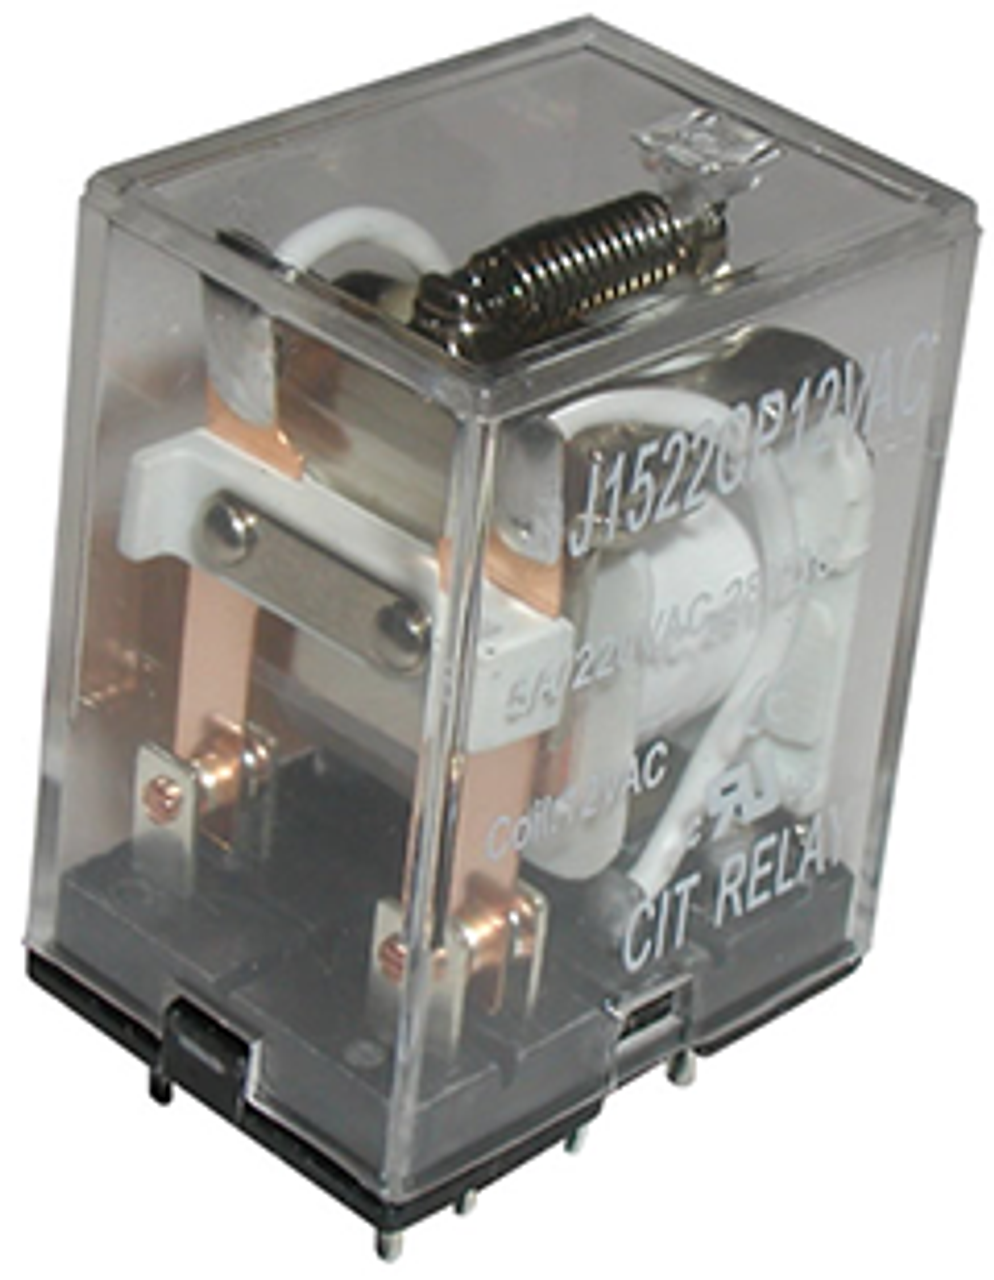 CIT Relay and Switch J1523CF220VAC Industrial Relays